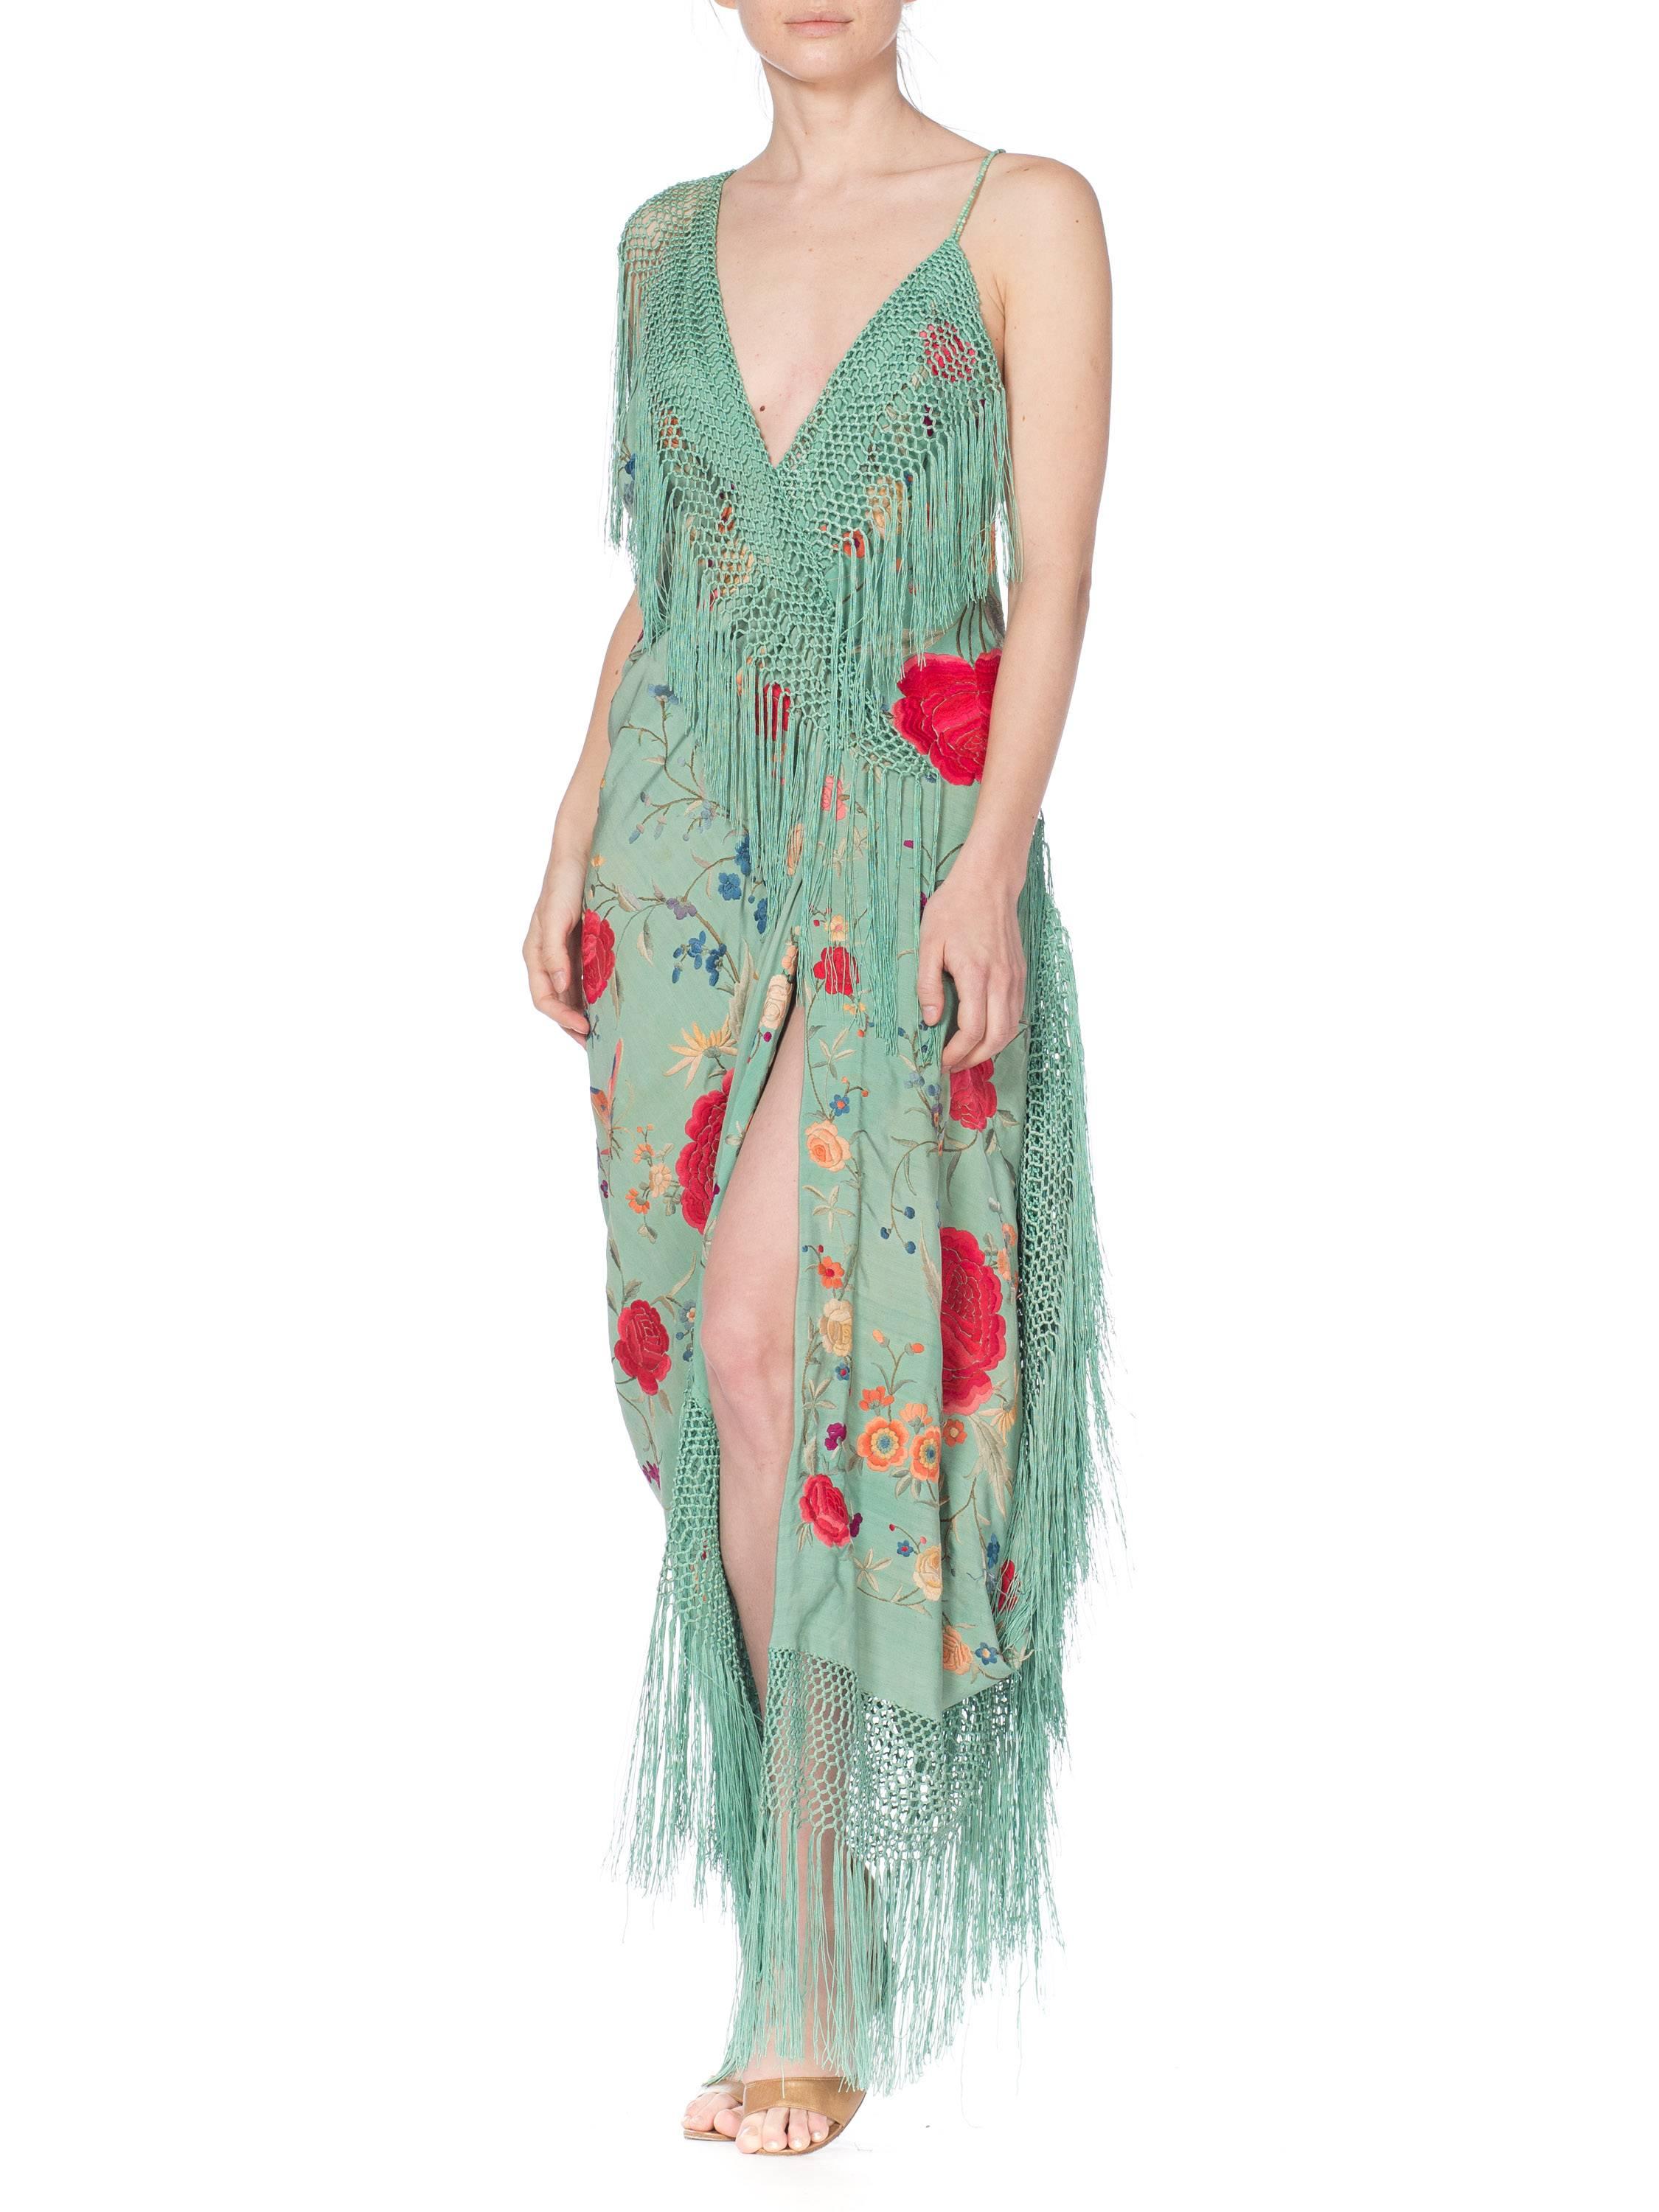 Morphew Collection Jade Piano Shawl Backless Dress with Fringe Train, 1920s  7